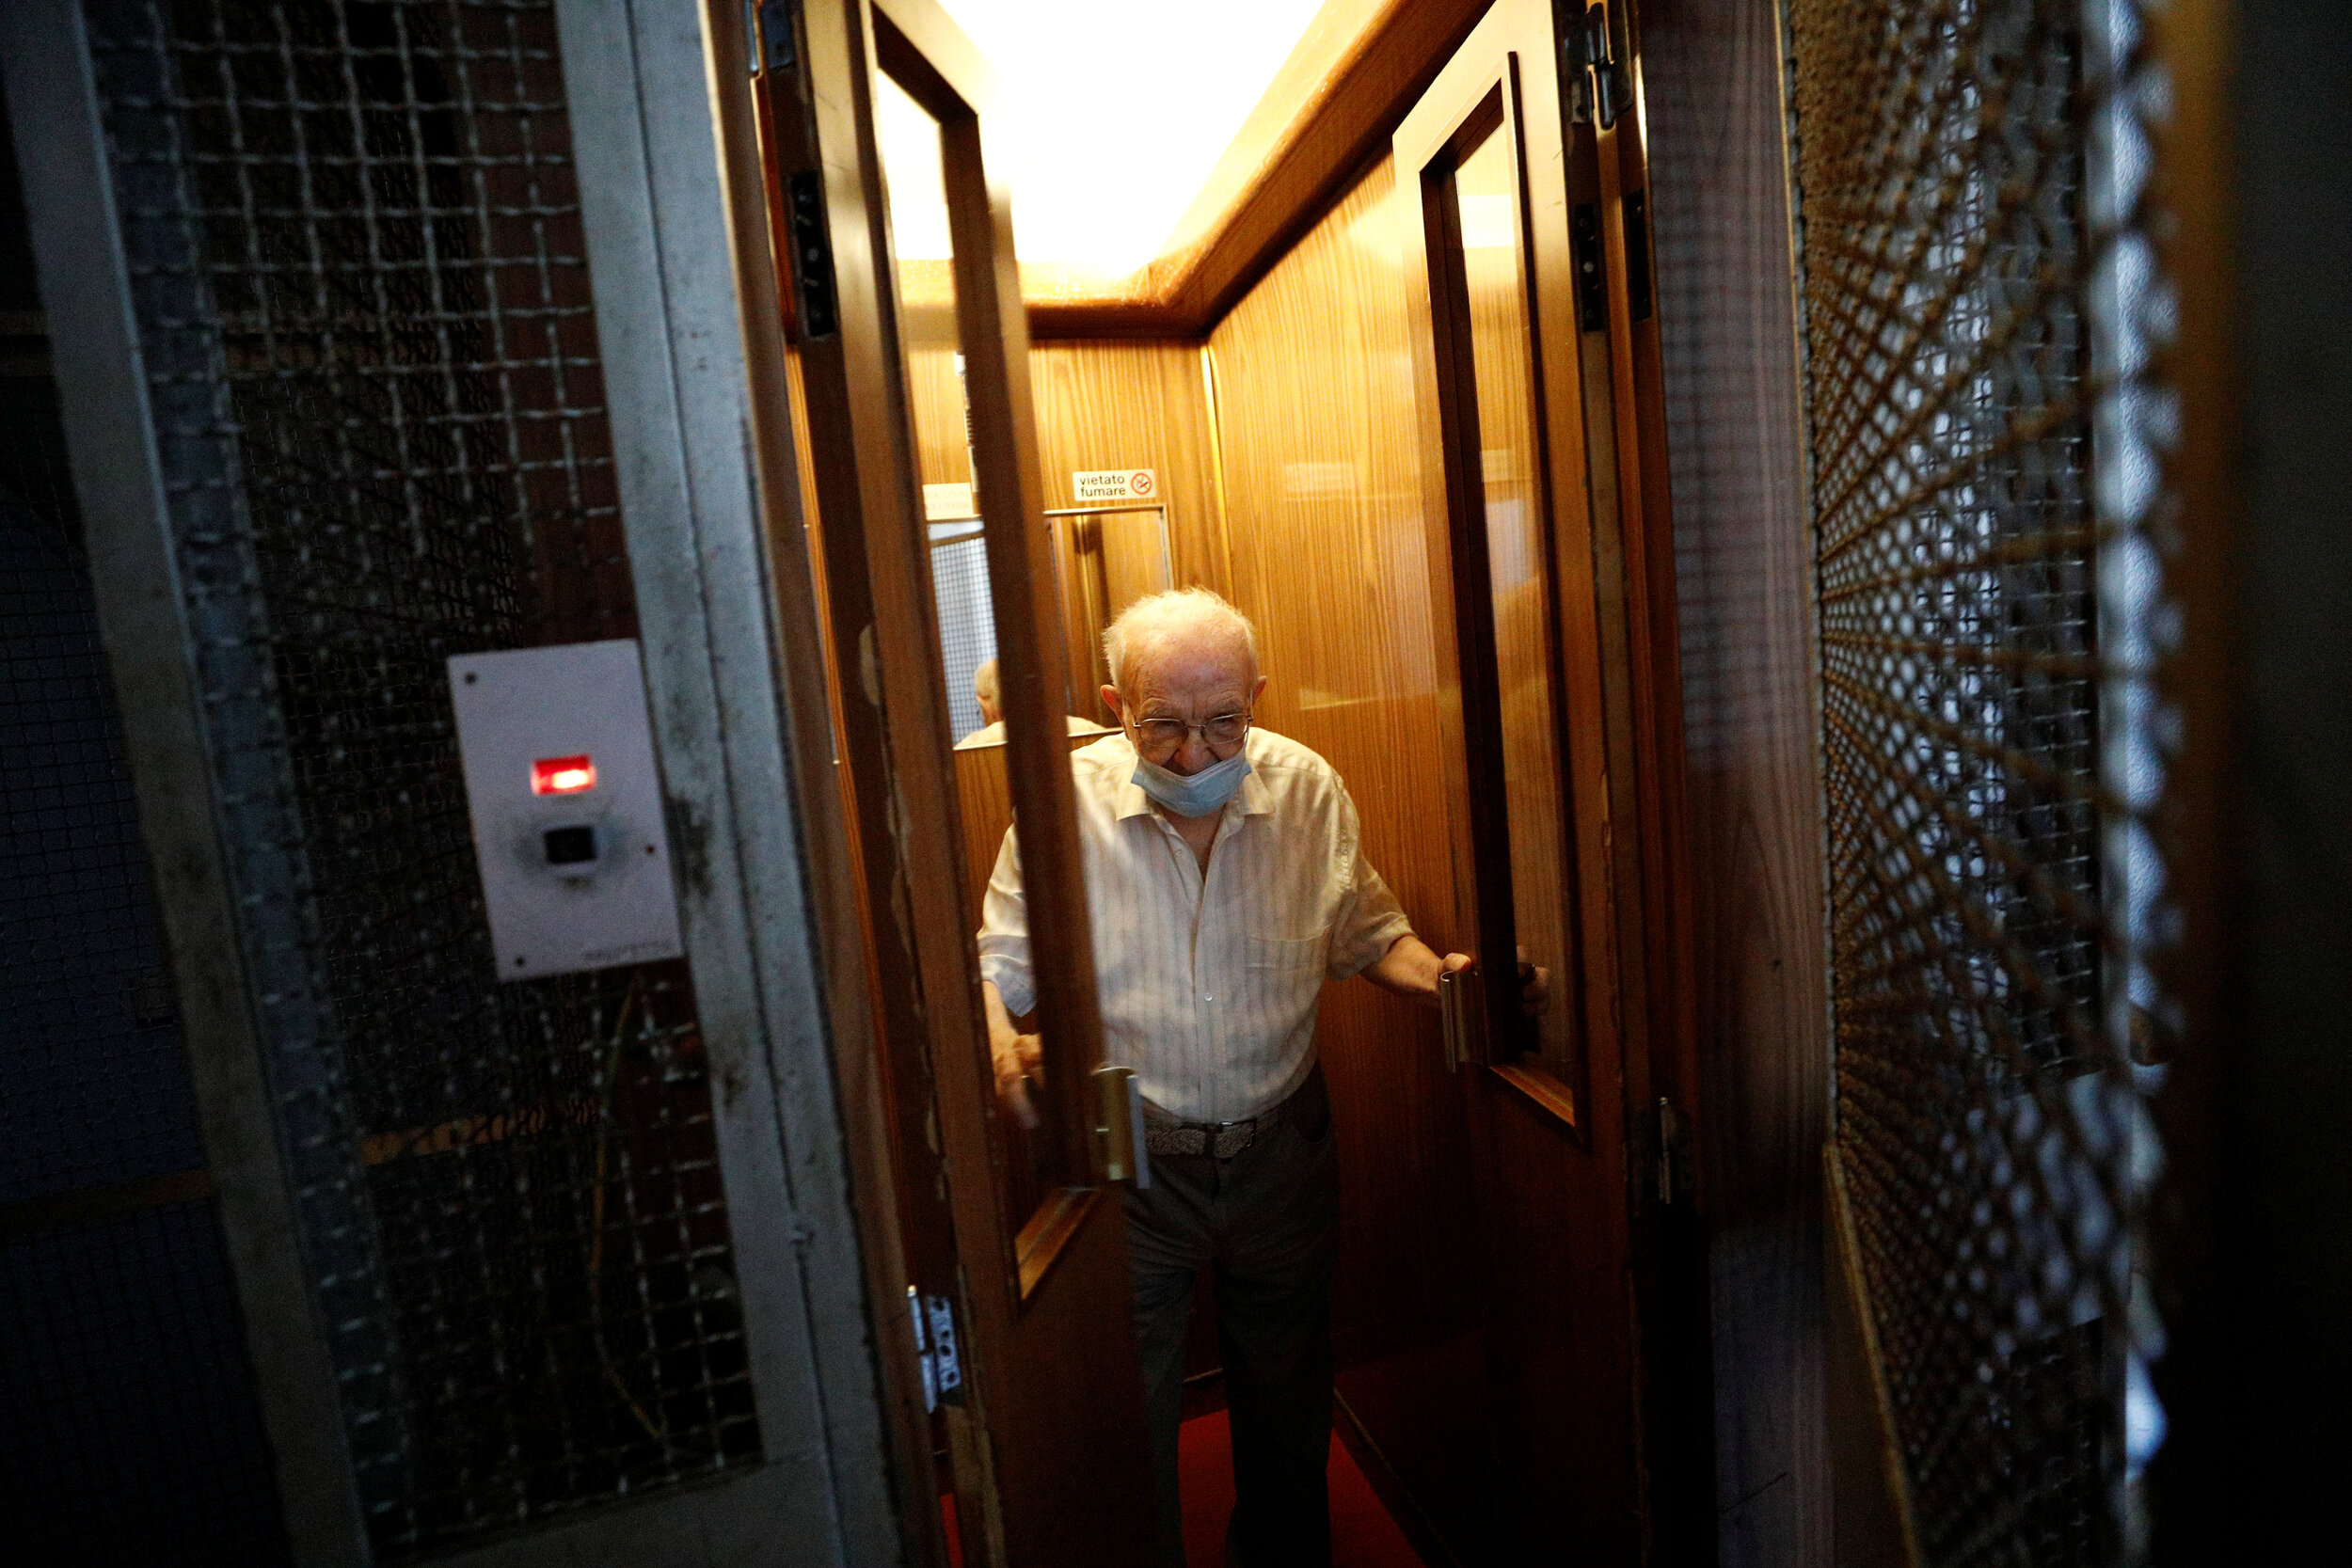  Giuseppe Paterno, 96, Italy's oldest student, takes an elevator up to his apartment, as he returns home from the supermarket, two days before he graduates from The University of Palermo with an undergraduate degree in history and philosophy, in Pale